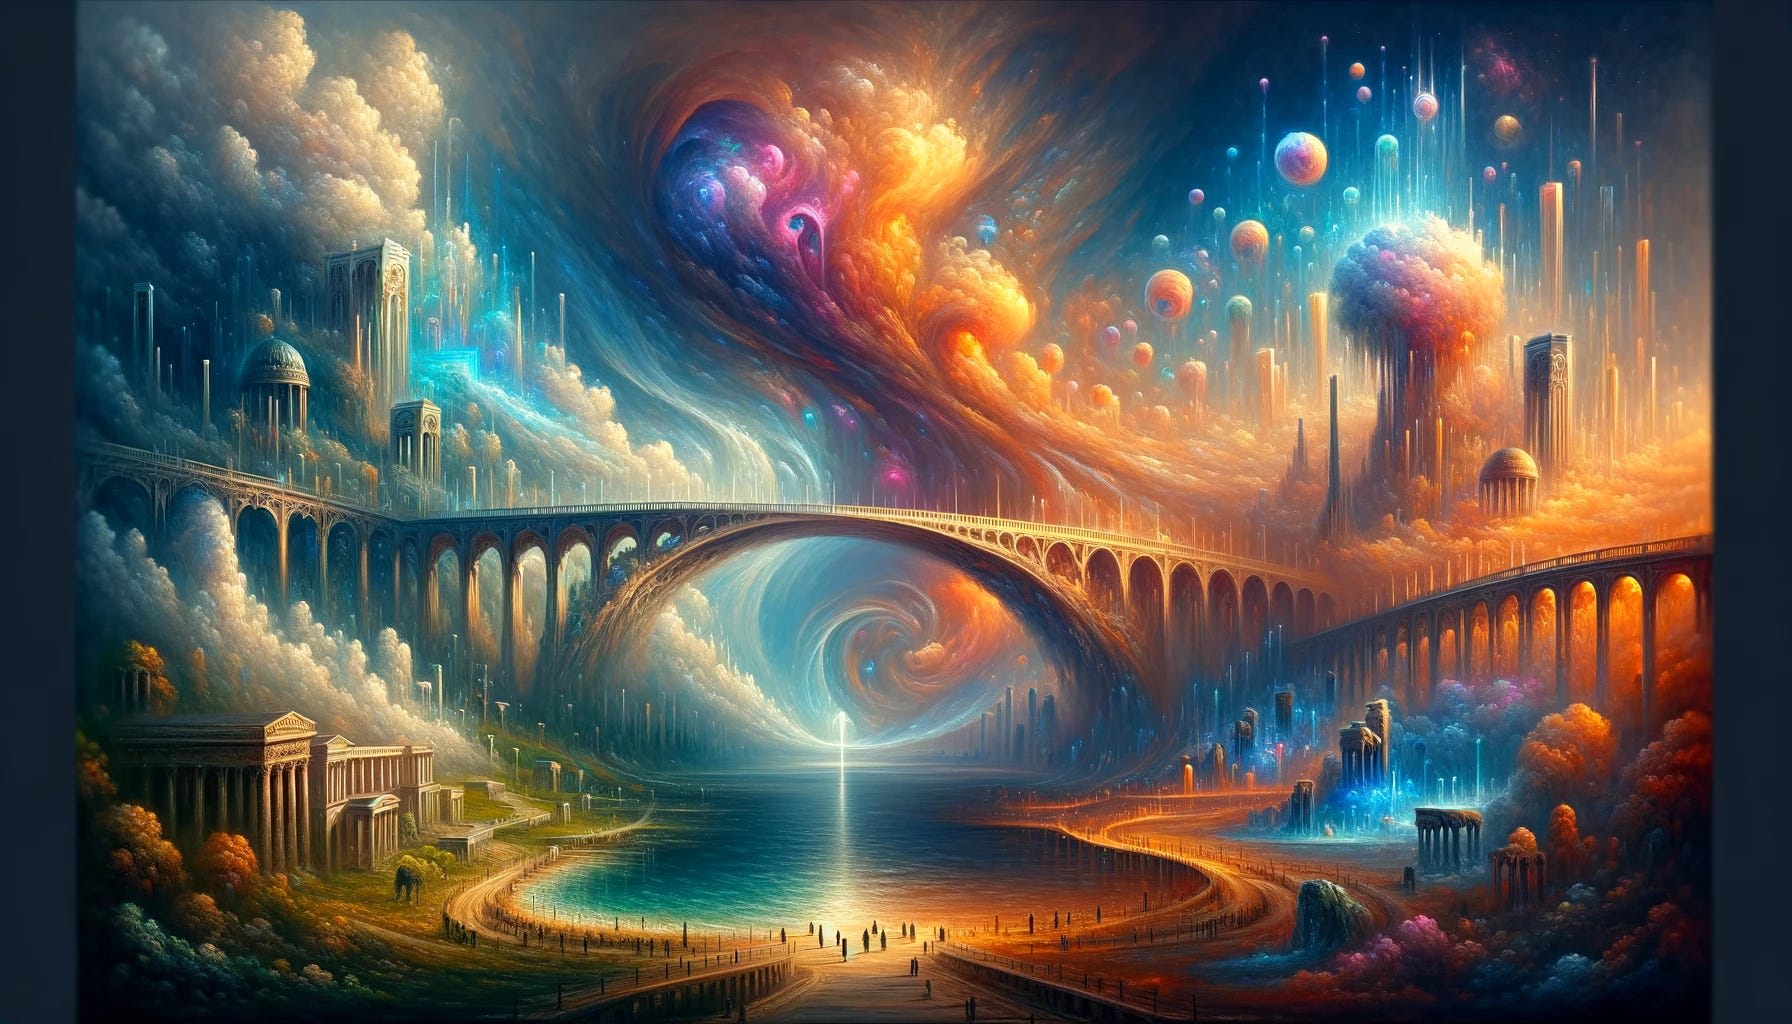 Imagine a widescreen oil painting from the Romantic era, depicting a bridge that serves as a boundary between two vastly different realms. On one side, the bridge begins in a realm of pure forms, where abstract geometry, forcefields, neon glass, and fractals dominate the landscape, creating an ethereal and surreal atmosphere. This side is characterized by its vibrant colors, glowing elements, and a sense of otherworldly beauty. The bridge itself is an architectural marvel, with no support pillars, appearing to float effortlessly. As it spans across, it transitions into the Roman Empire, where the environment shifts dramatically to a more down-to-earth setting. Here, the landscape is adorned with marble structures, classical Roman architecture, and lacks any form of abstract geometry. The bridge seamlessly blends these two contrasting worlds, symbolizing a connection between the mystical and the tangible. The overall scene is depicted with the lush, dramatic lighting and emotional depth characteristic of Romantic era oil paintings, capturing the viewer